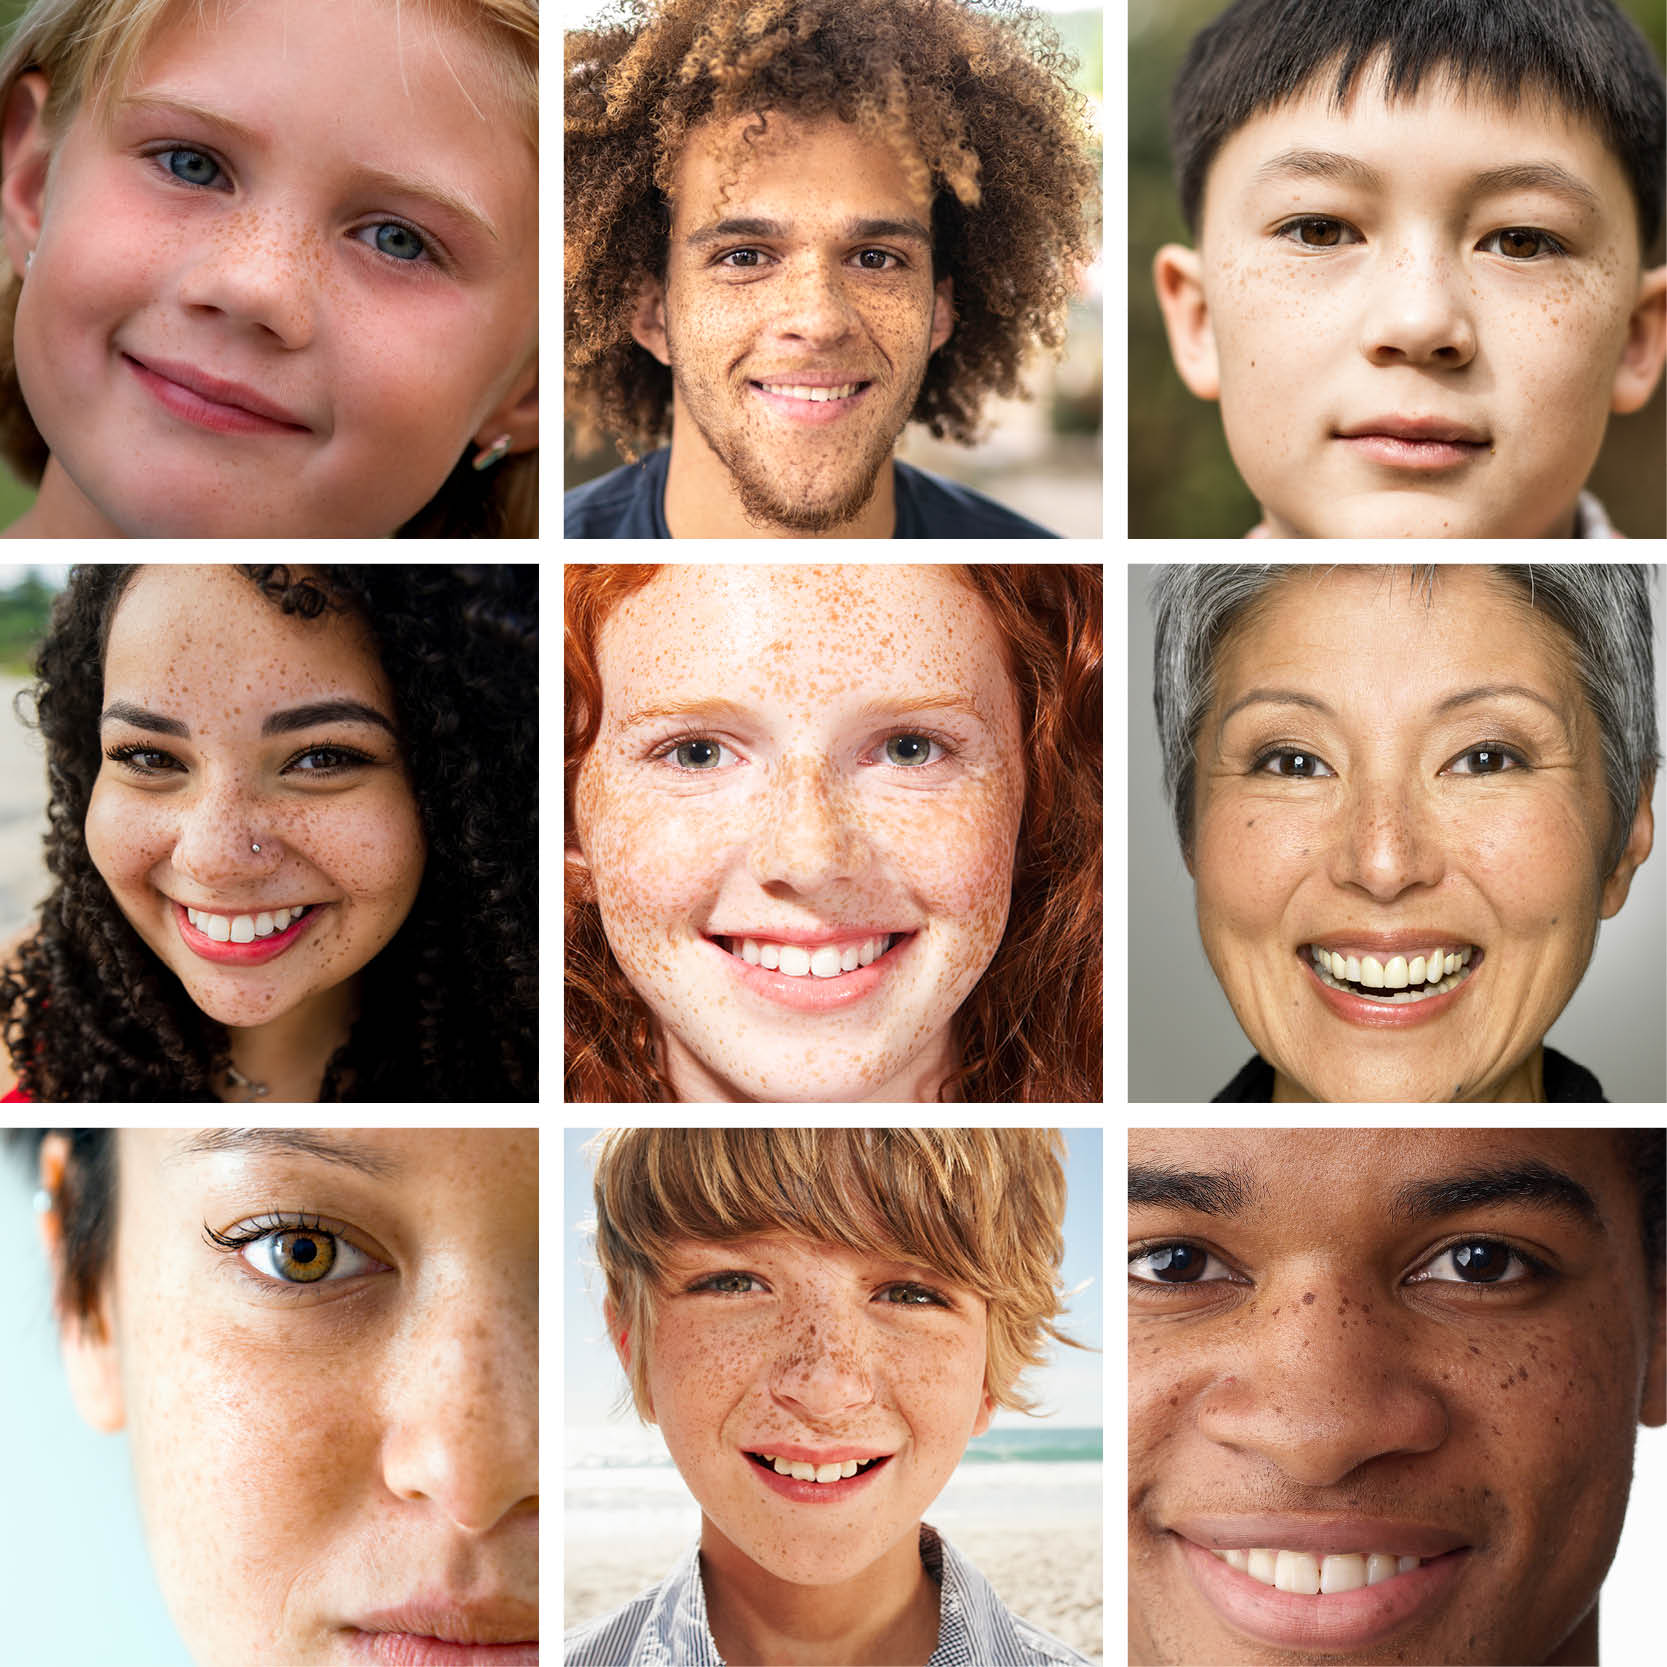 Pictures of the faces of nine people with freckles. They have different skin tones, ethnicities and hair colors.